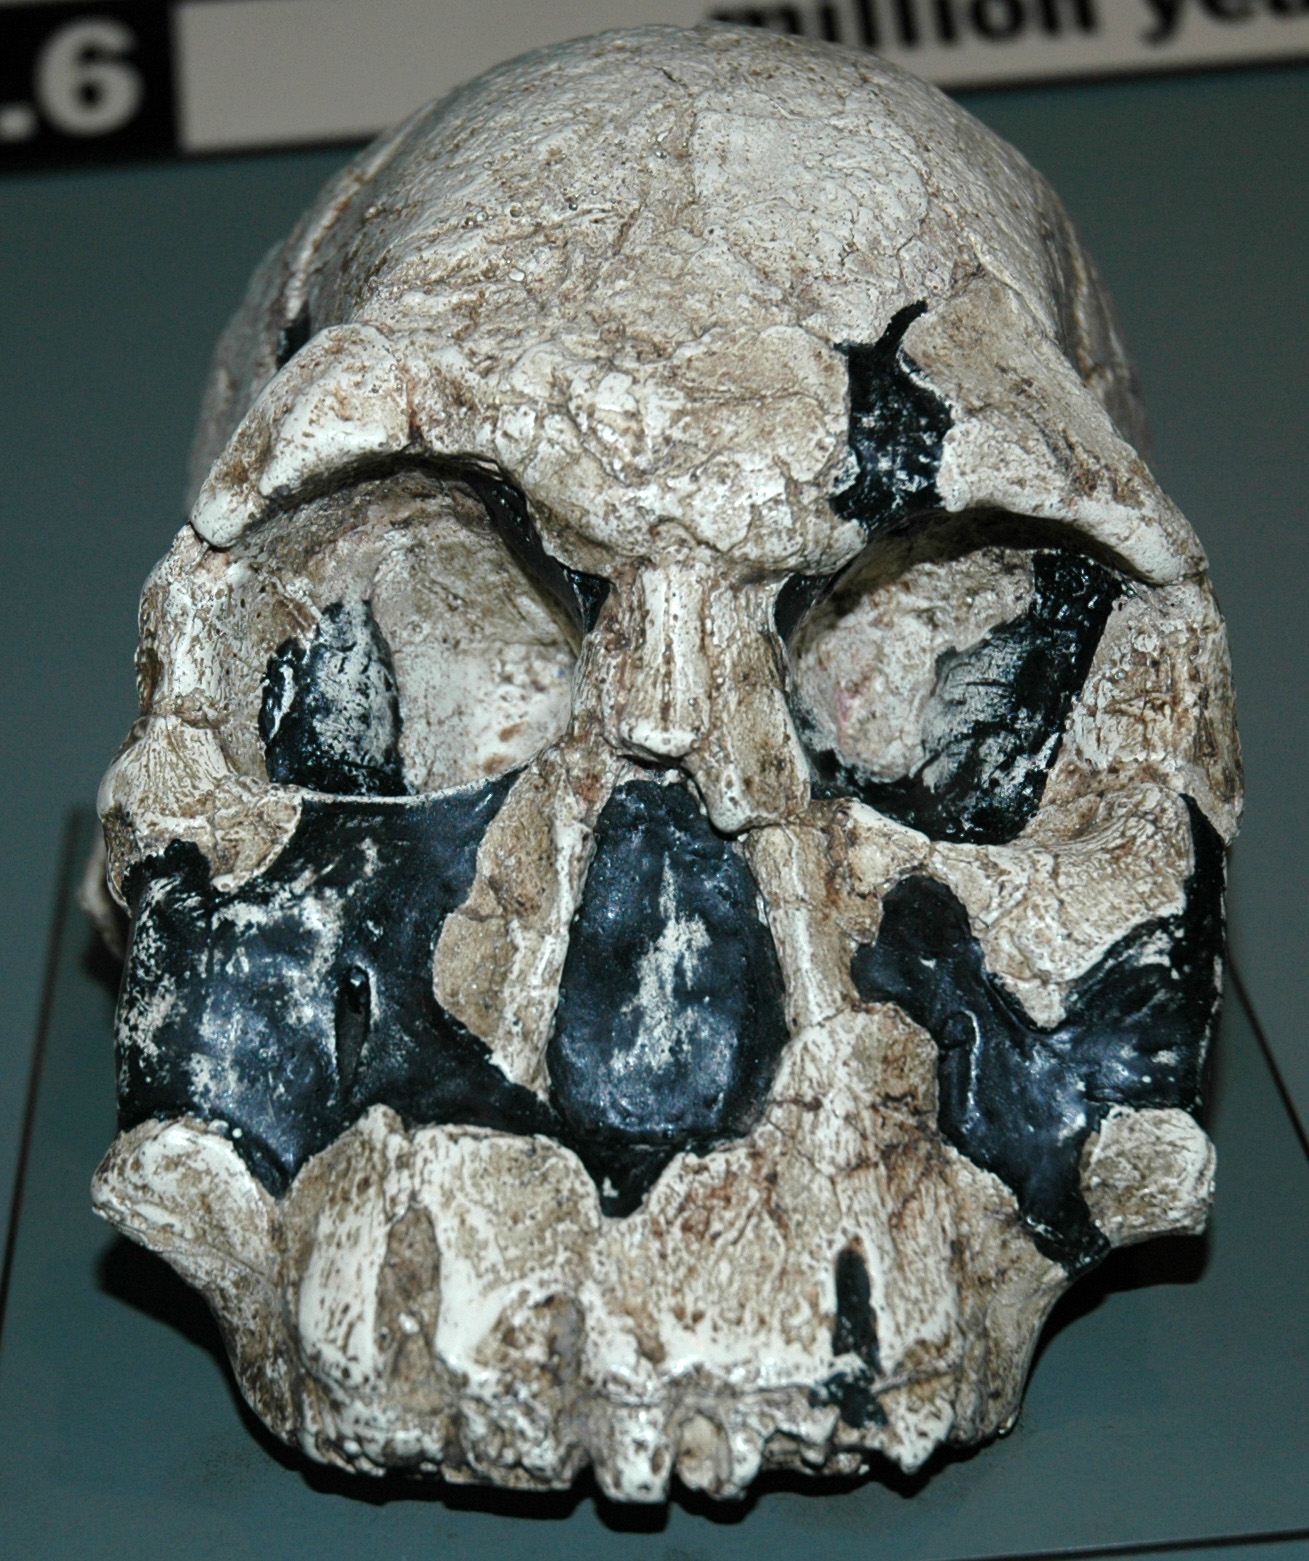 a fake human skull has been designed to look like a skull